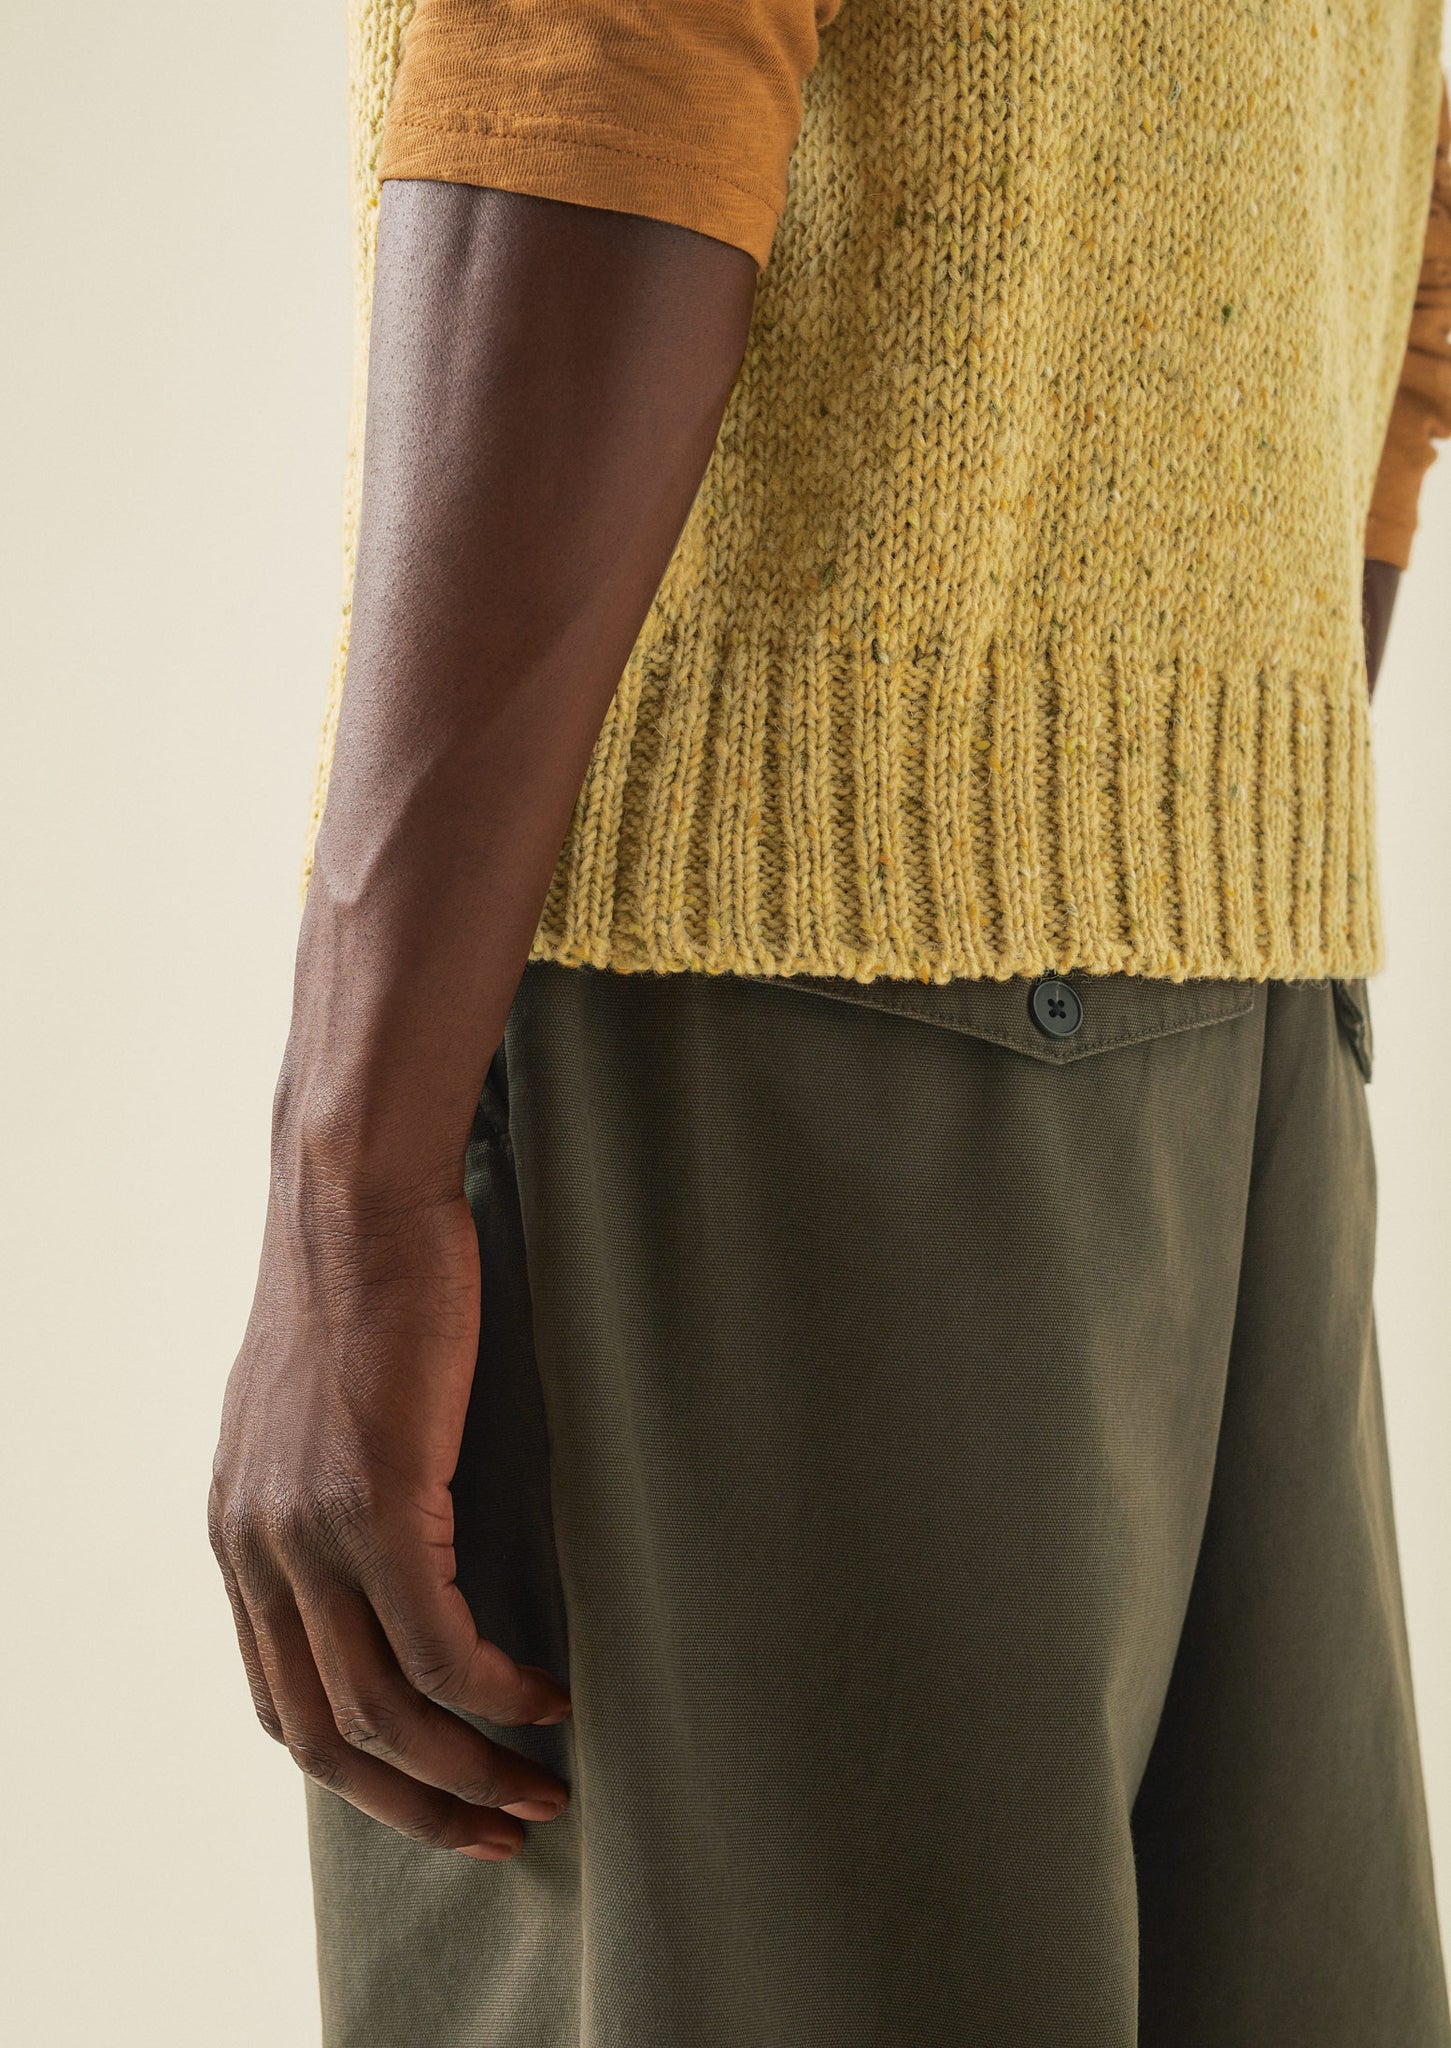 Donegal Wool Knitted Tank | Soft Yellow